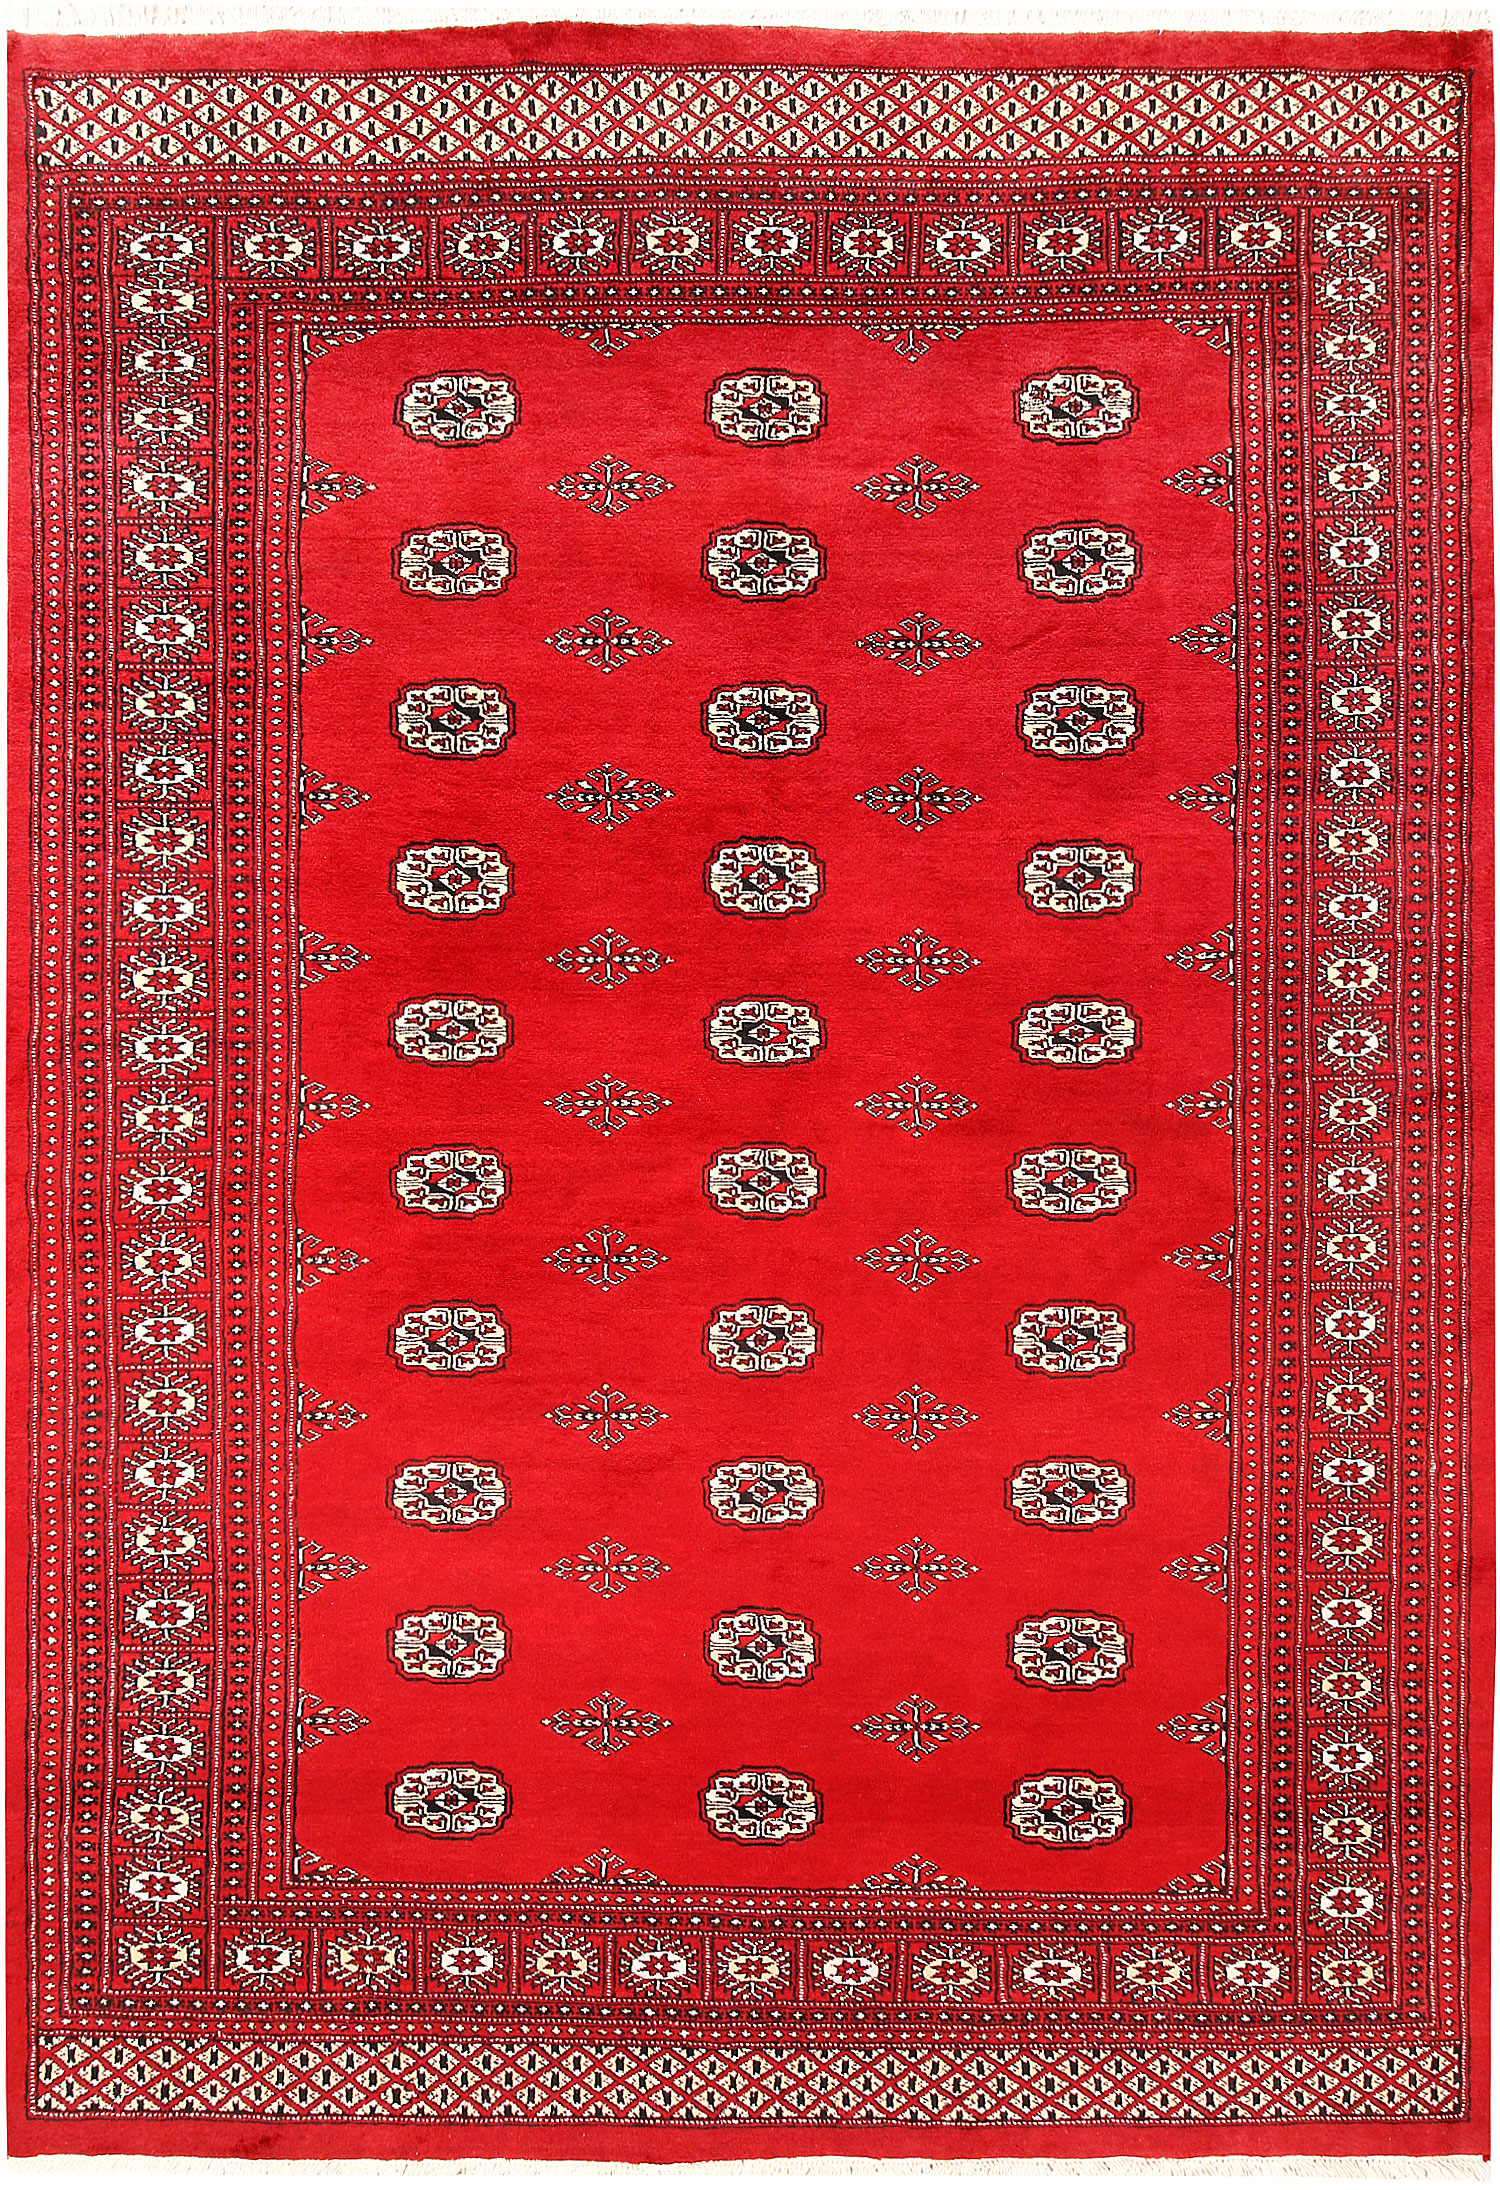 Rug Under Table Size